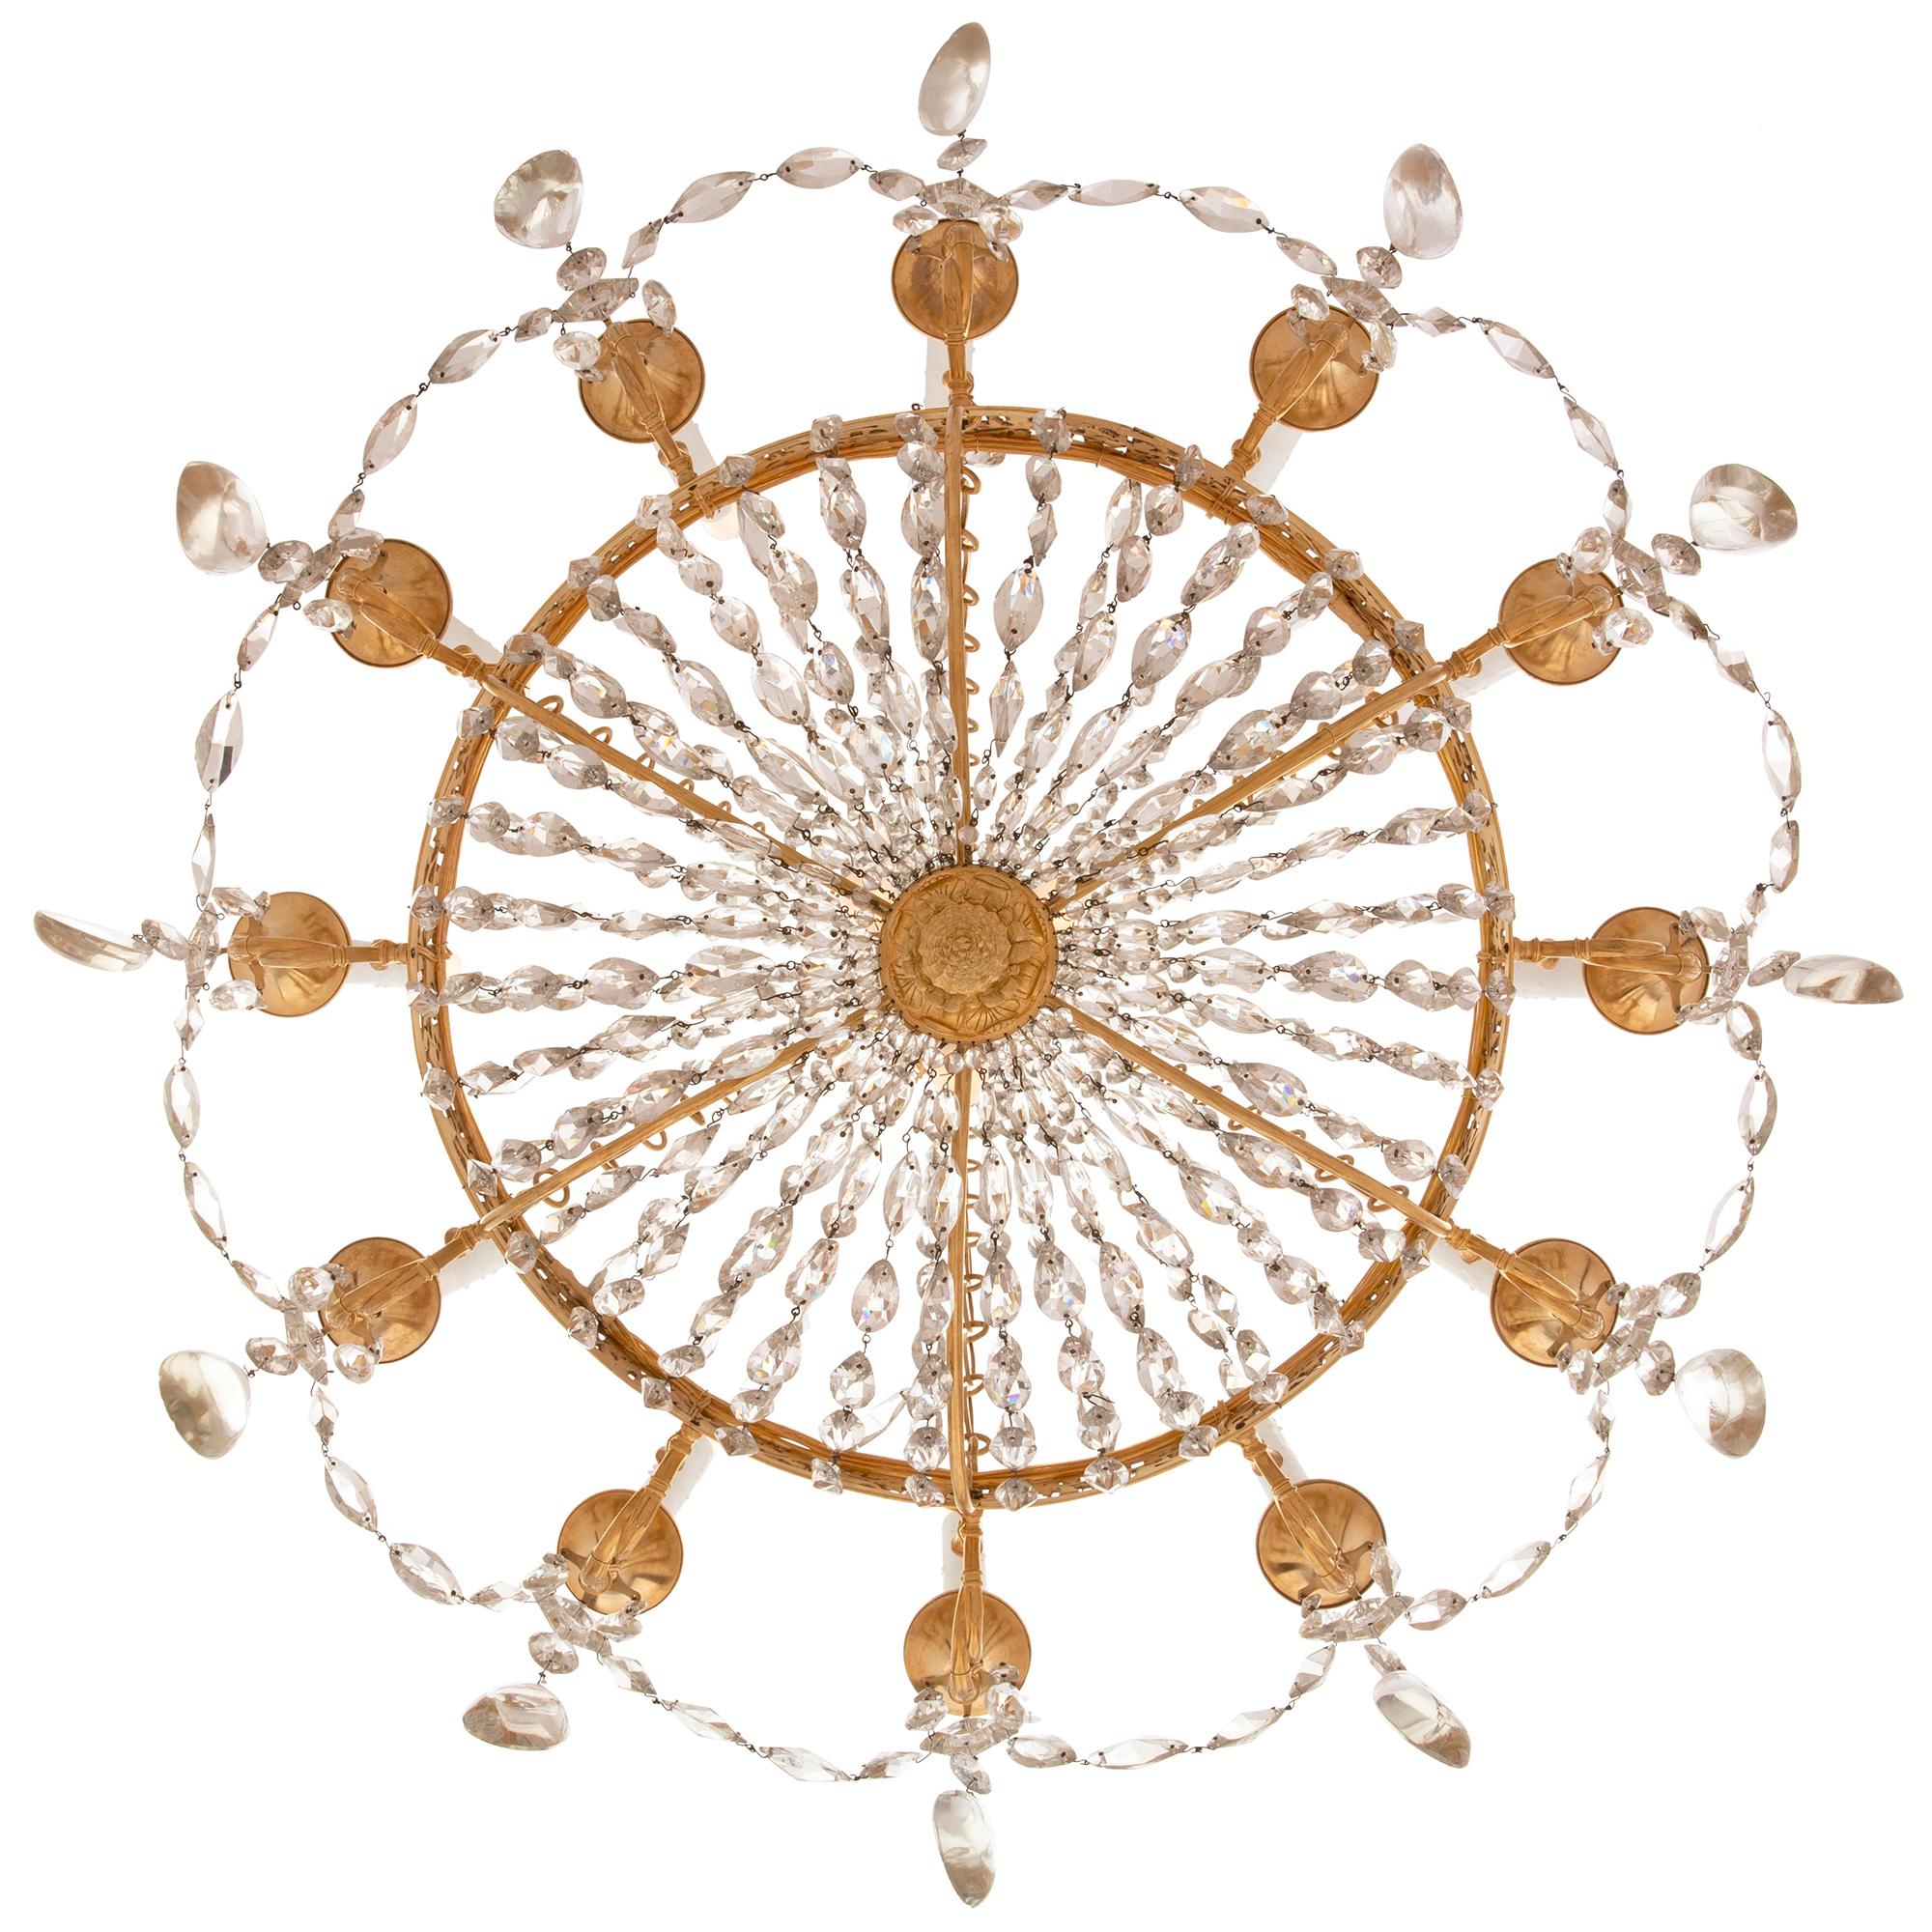 French 19th Century Neoclassical Style Ormolu and Baccarat Crystal Chandelier For Sale 5